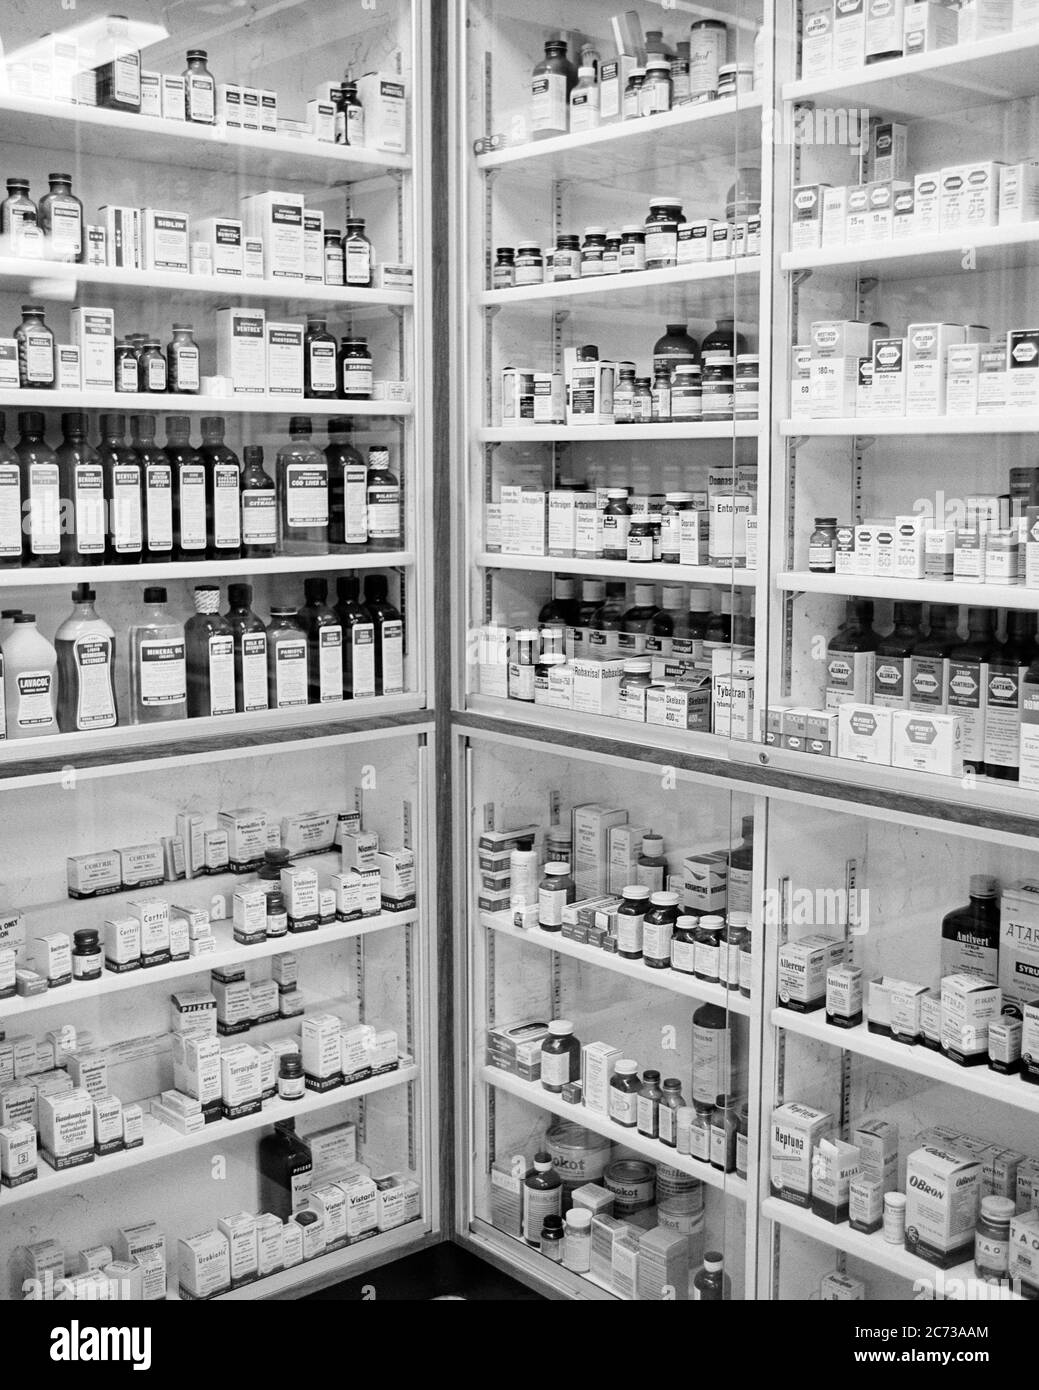 1970s PHARMACY INTERIOR STORAGE SHELVES CONTAINING SUPPLIES OF DRUGS AND MEDICINES IN BOTTLES AND BOXES - s17402 HAR001 HARS MEDICINES PROTECTION HEALING CUSTOMER SERVICE AND DIAGNOSIS CHOICE KNOWLEDGE PHARMACEUTICAL POWERFUL INNOVATION HEALTH CARE IN OF OCCUPATIONS STORES TREATMENT CONCEPT CONCEPTUAL STILL LIFE REMEDIES SYMBOLIC COMMERCE CONCEPTS SUPPLY BLACK AND WHITE BUSINESSES DISEASE HAR001 MEDICATIONS OLD FASHIONED REPRESENTATION Stock Photo